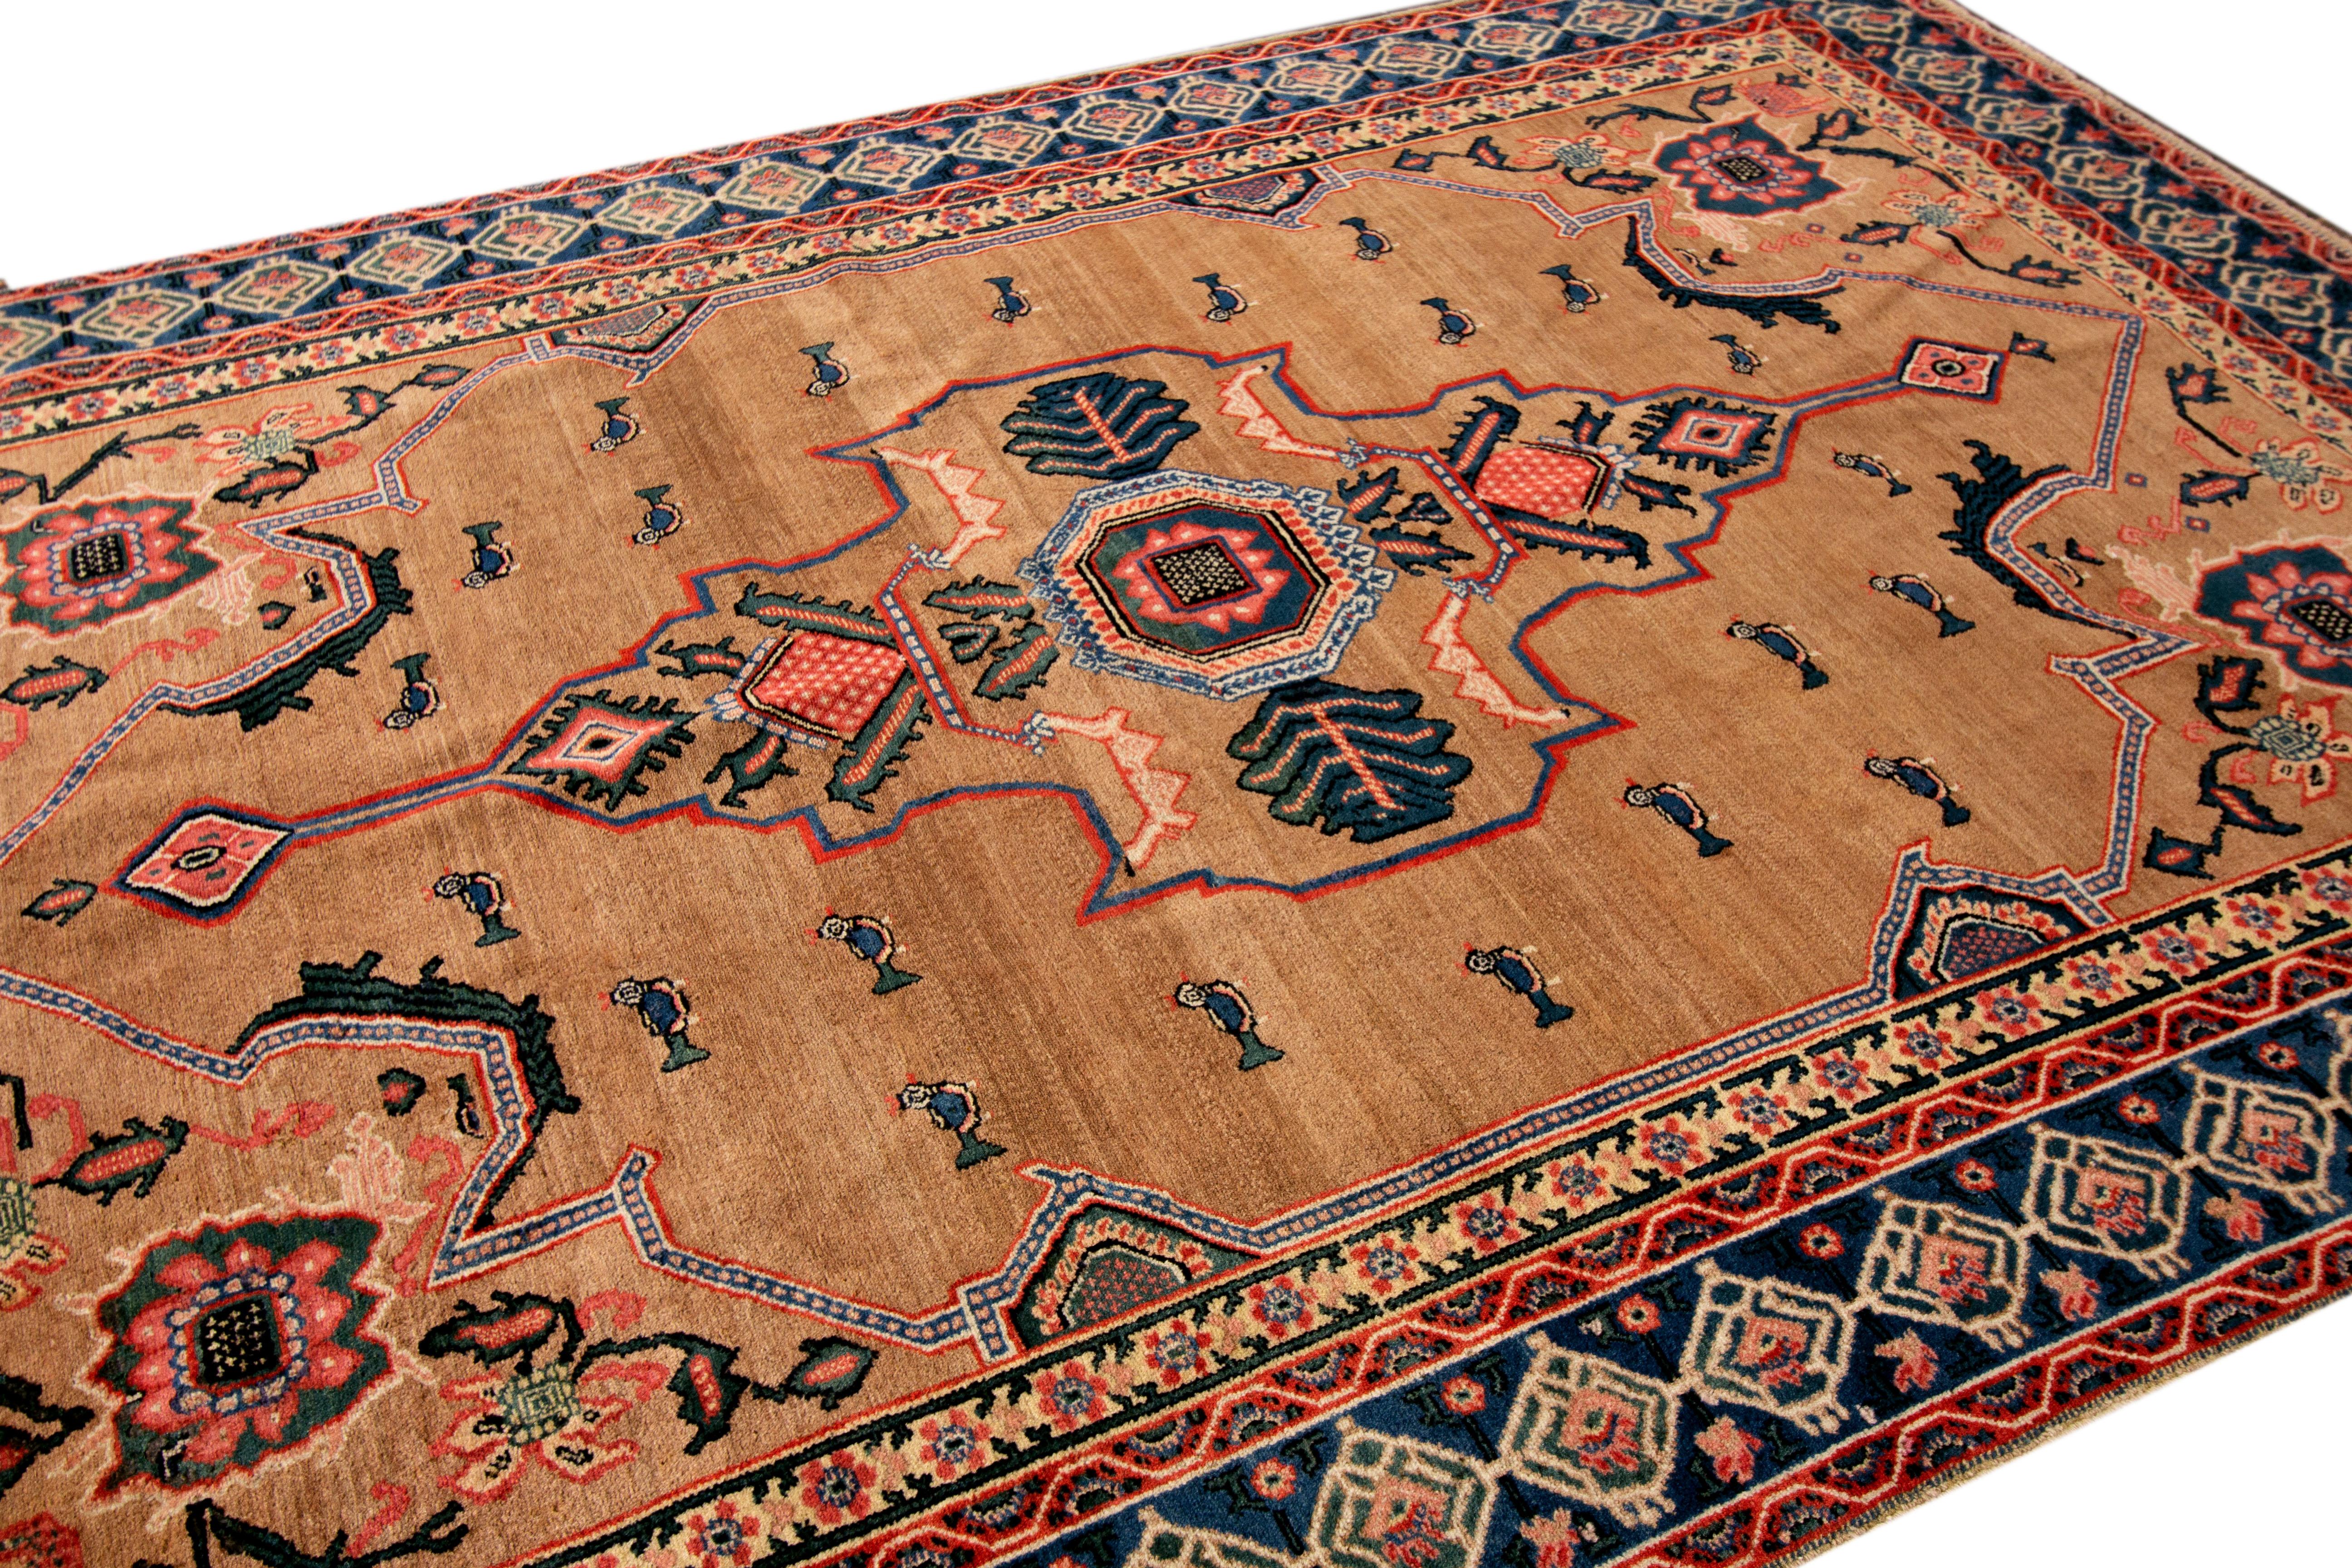 An antique Persian Sennah rug with a medallion geometric. This piece has fine details, great colors, and a beautiful design. It would be the perfect addition to your home. This rug measures 4'9